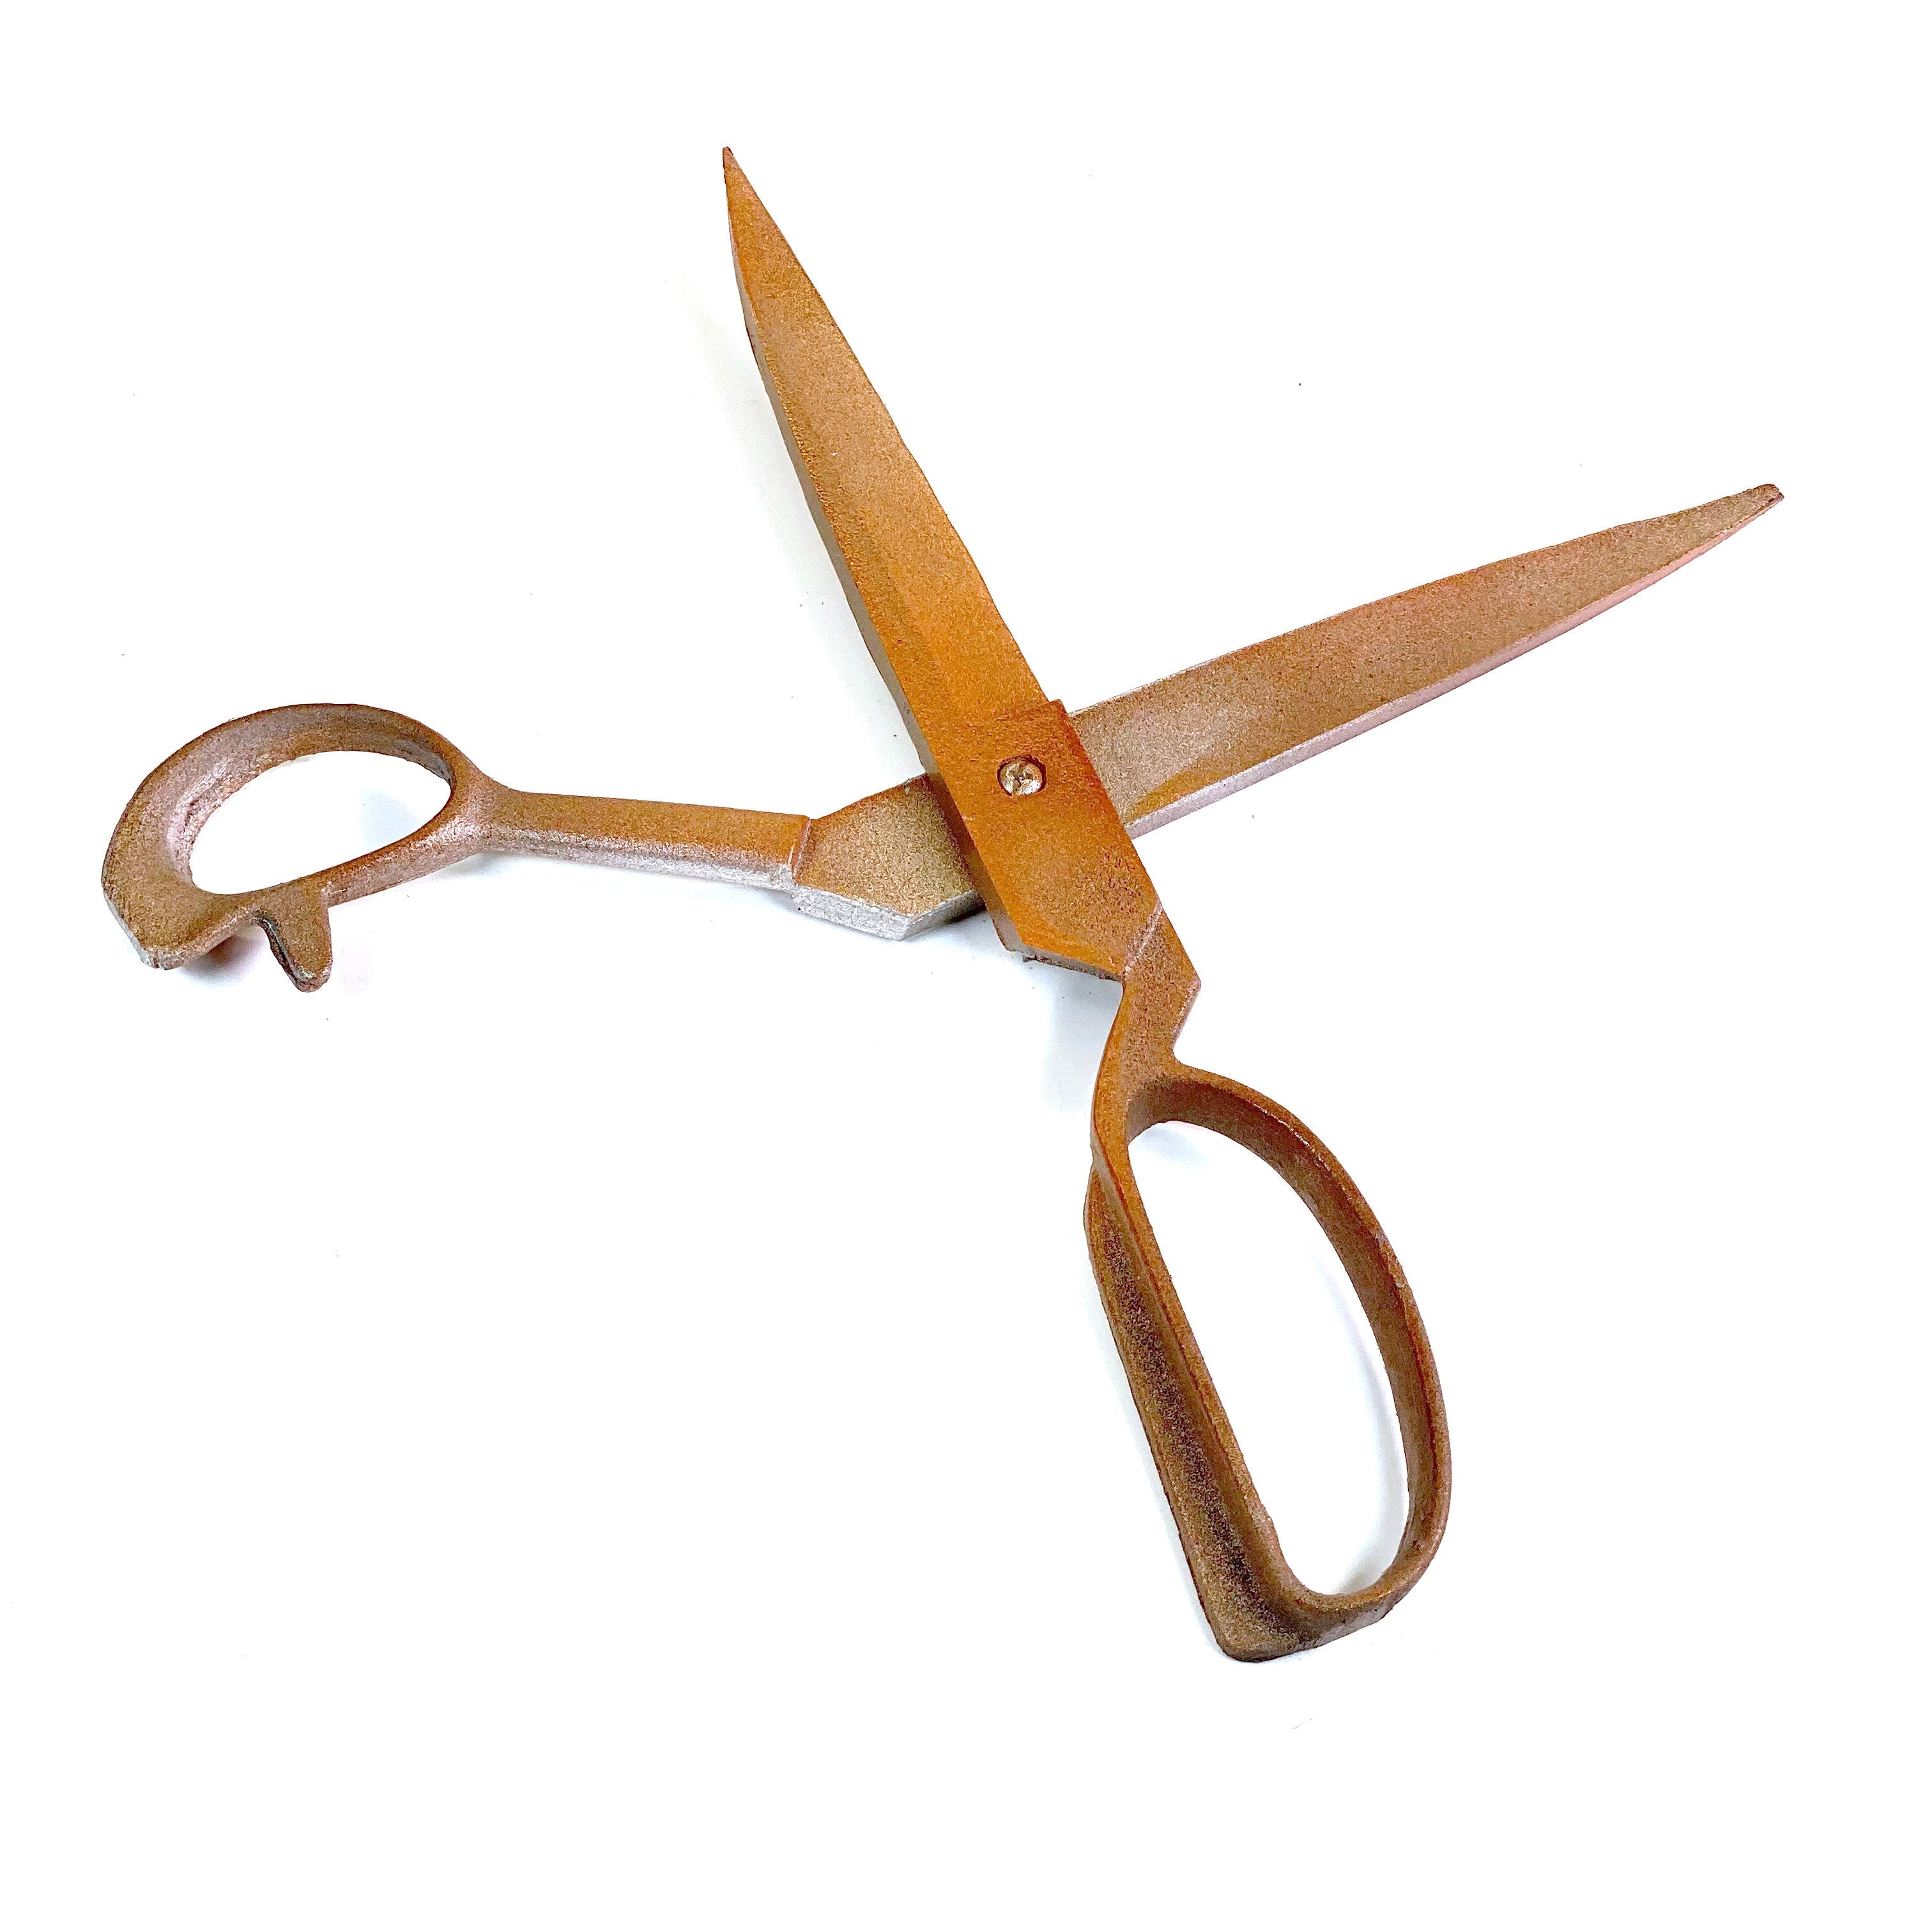 Large Plastic Scissors or Shears with Functional Moving Parts - Rusty - Rusted Chrome